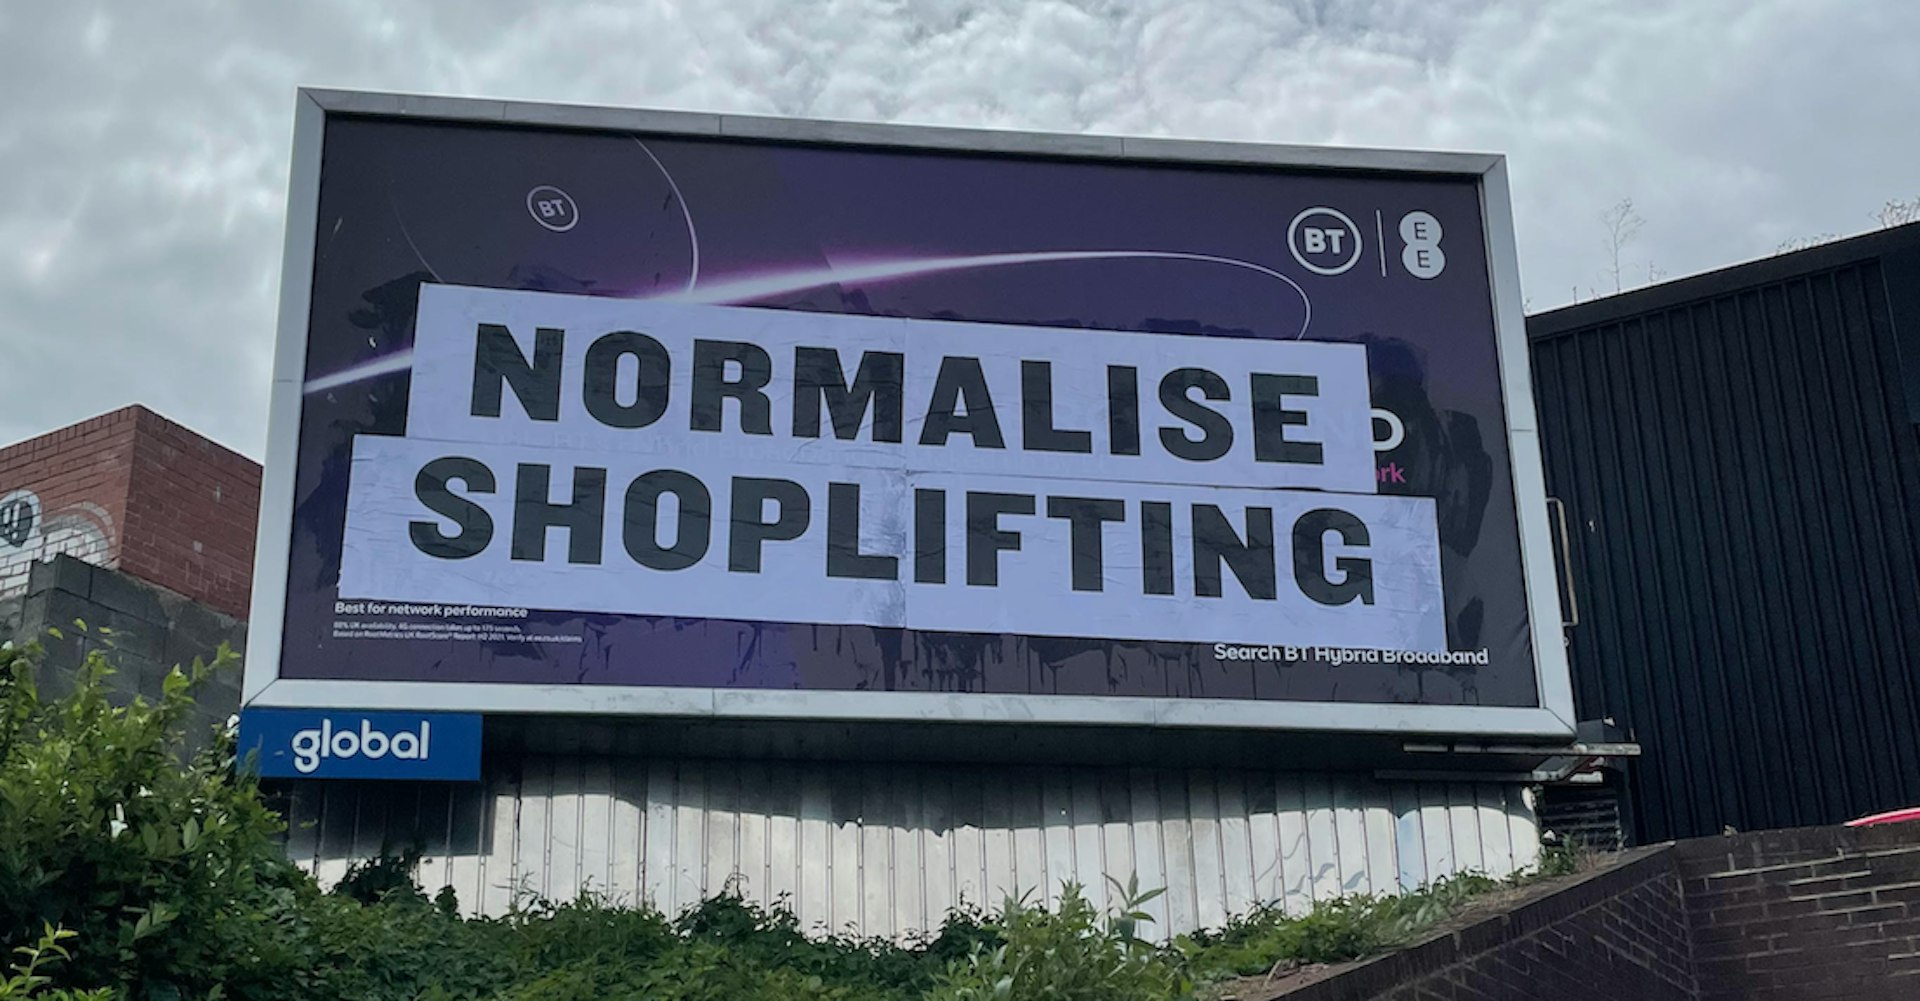 Shoplifting is set to go mass market